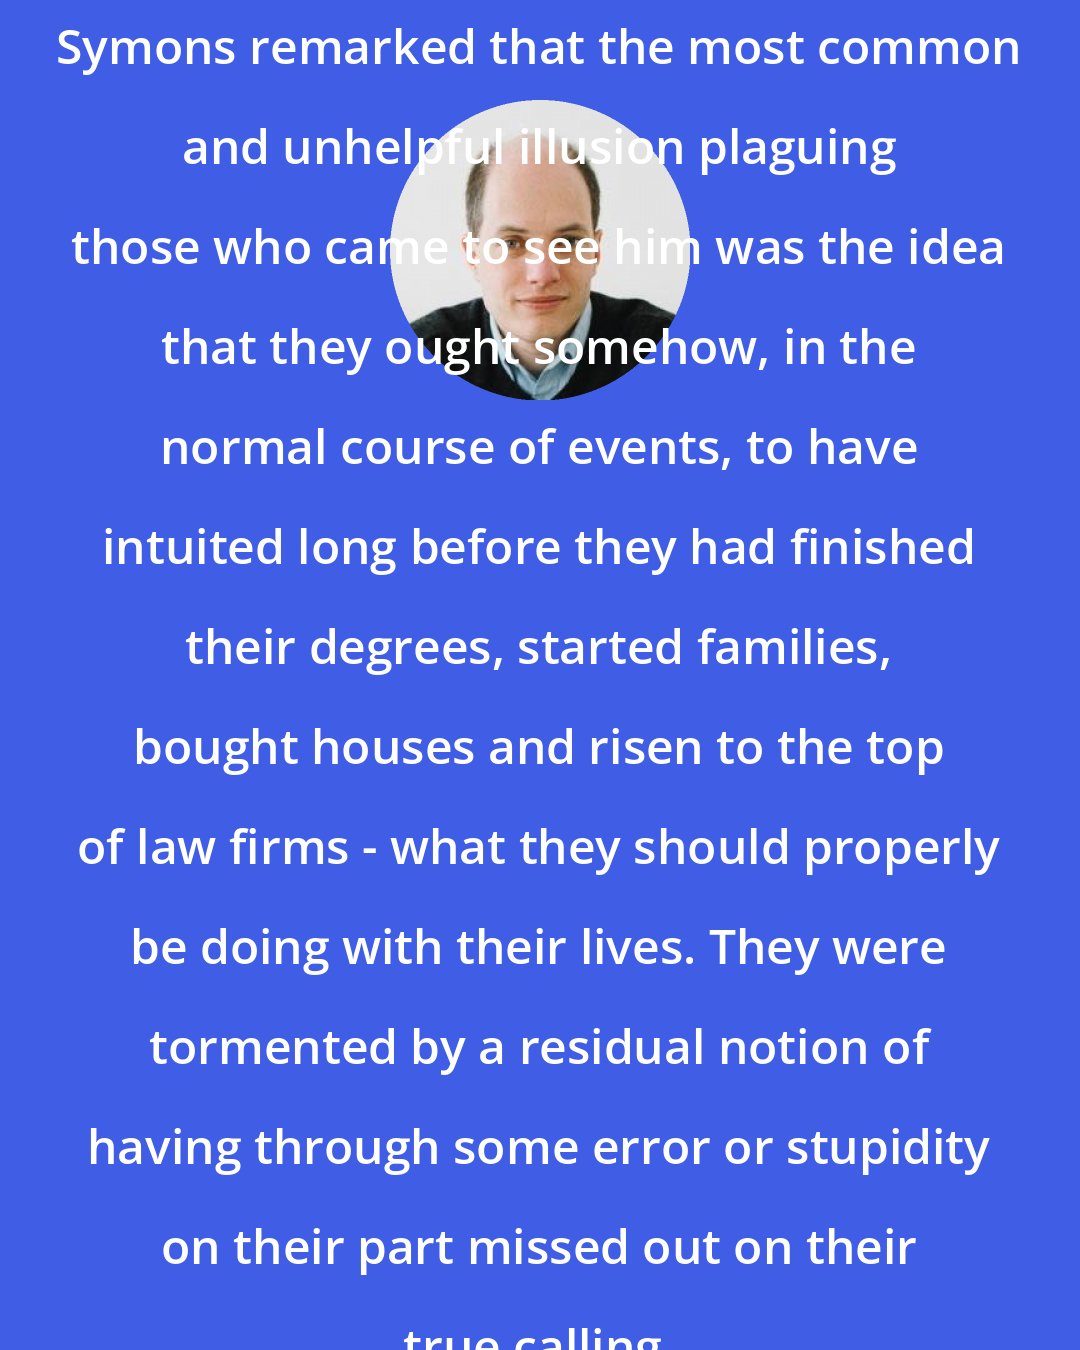 Alain de Botton: Symons remarked that the most common and unhelpful illusion plaguing those who came to see him was the idea that they ought somehow, in the normal course of events, to have intuited long before they had finished their degrees, started families, bought houses and risen to the top of law firms - what they should properly be doing with their lives. They were tormented by a residual notion of having through some error or stupidity on their part missed out on their true calling.